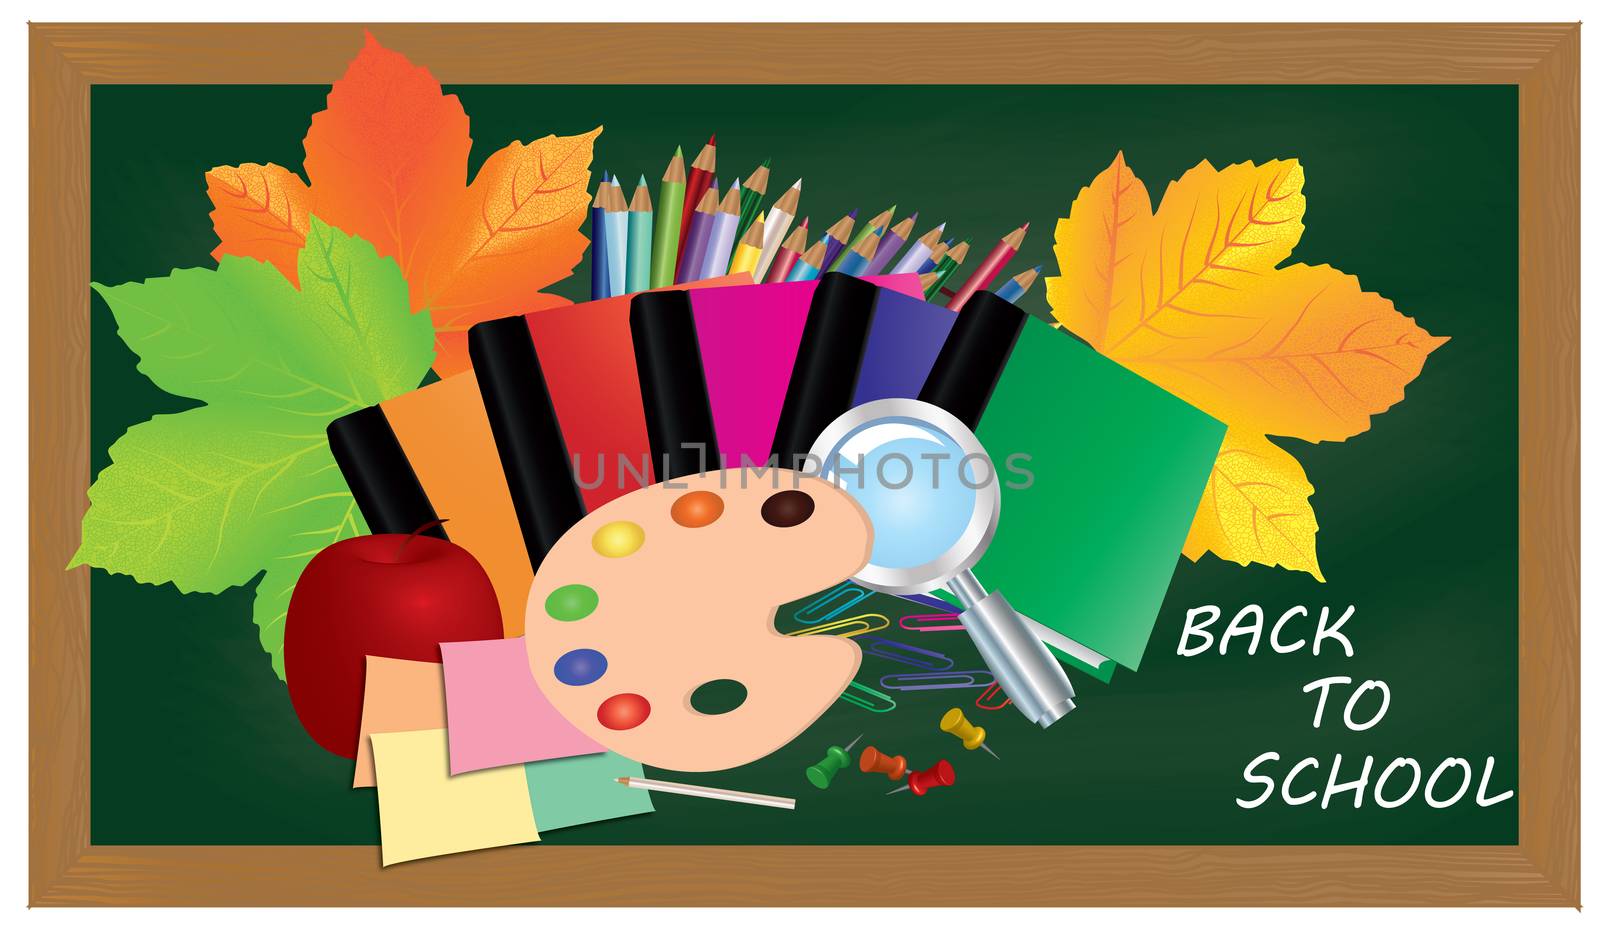 Back to school. Green desk with school supplies and autumn leaves.